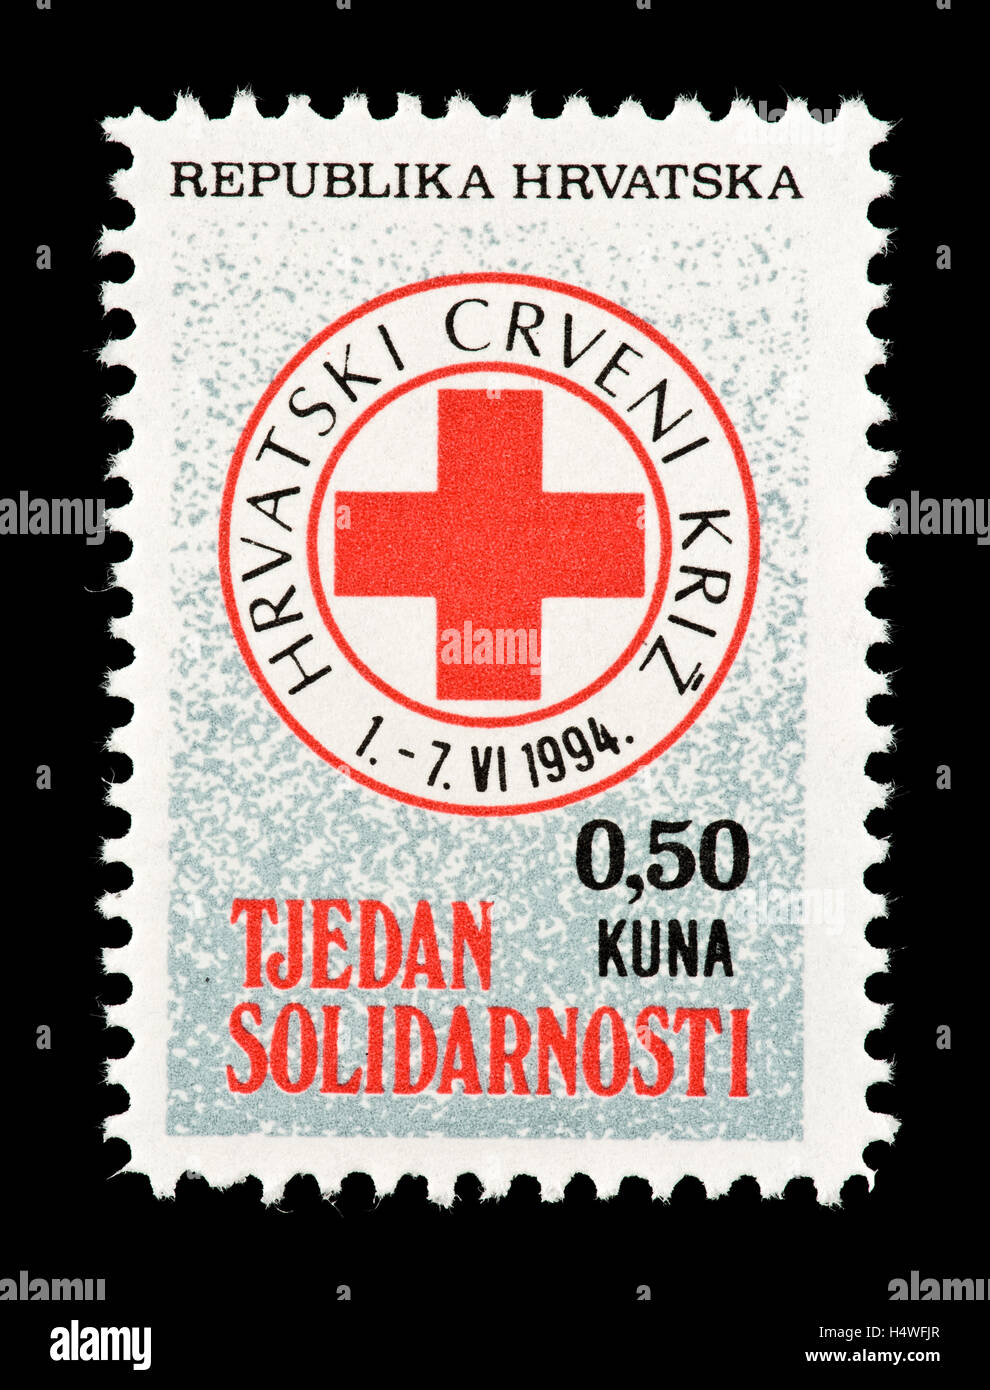 Postage from issued Red Cross Solidarity Stock Photo - Alamy